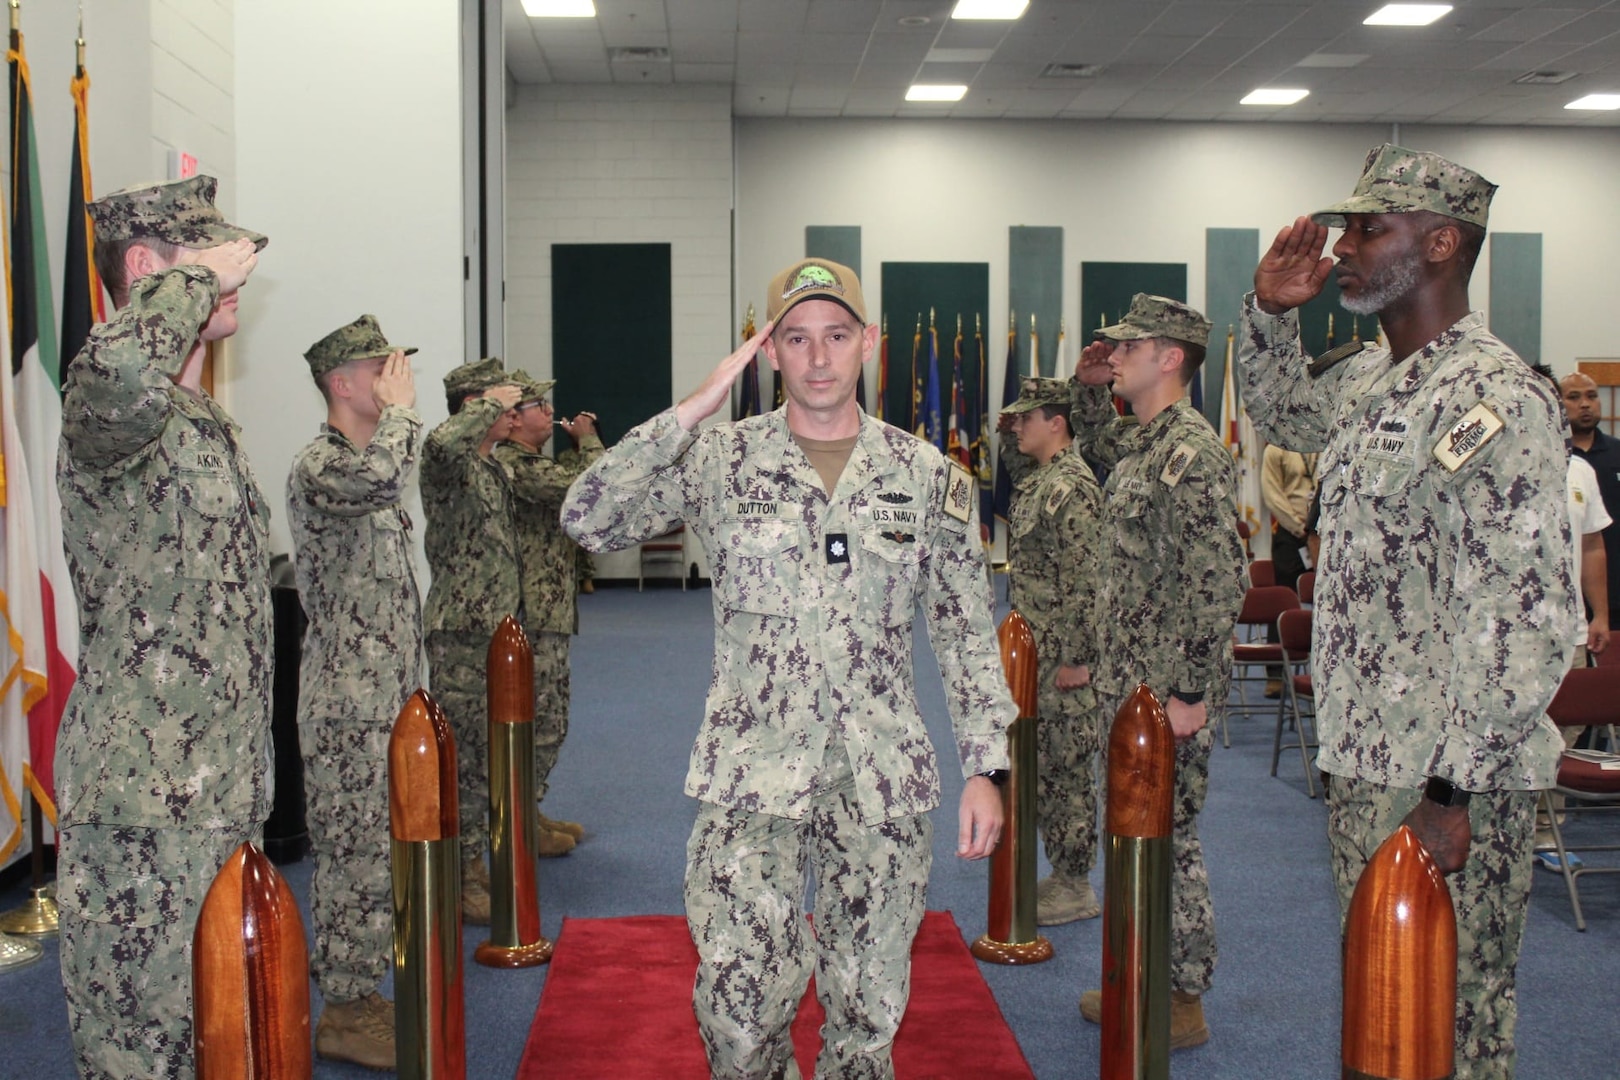 Cmdr. Timothy Dutton relieved Capt. William Sumsion as officer in charge of Forward Deployed Regional Maintenance Center (FDRMC) Detachment Bahrain in a change of charge ceremony held onboard U.S. Naval Support Activity Bahrain, Dec. 15, 2022.